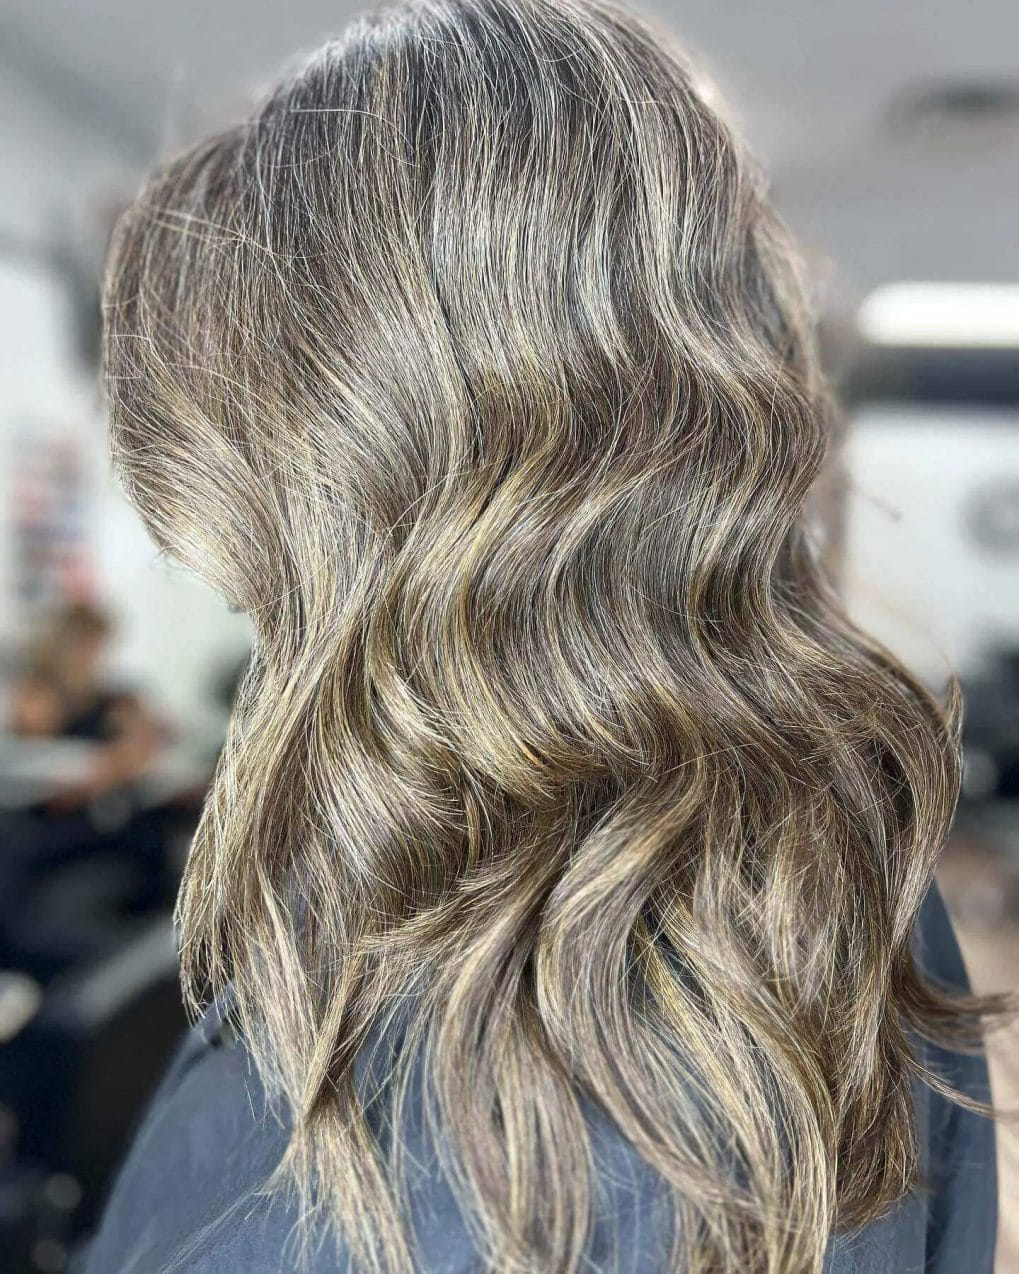 Natural sun-kissed balayage weaving cool grays and warm blondes in layers.